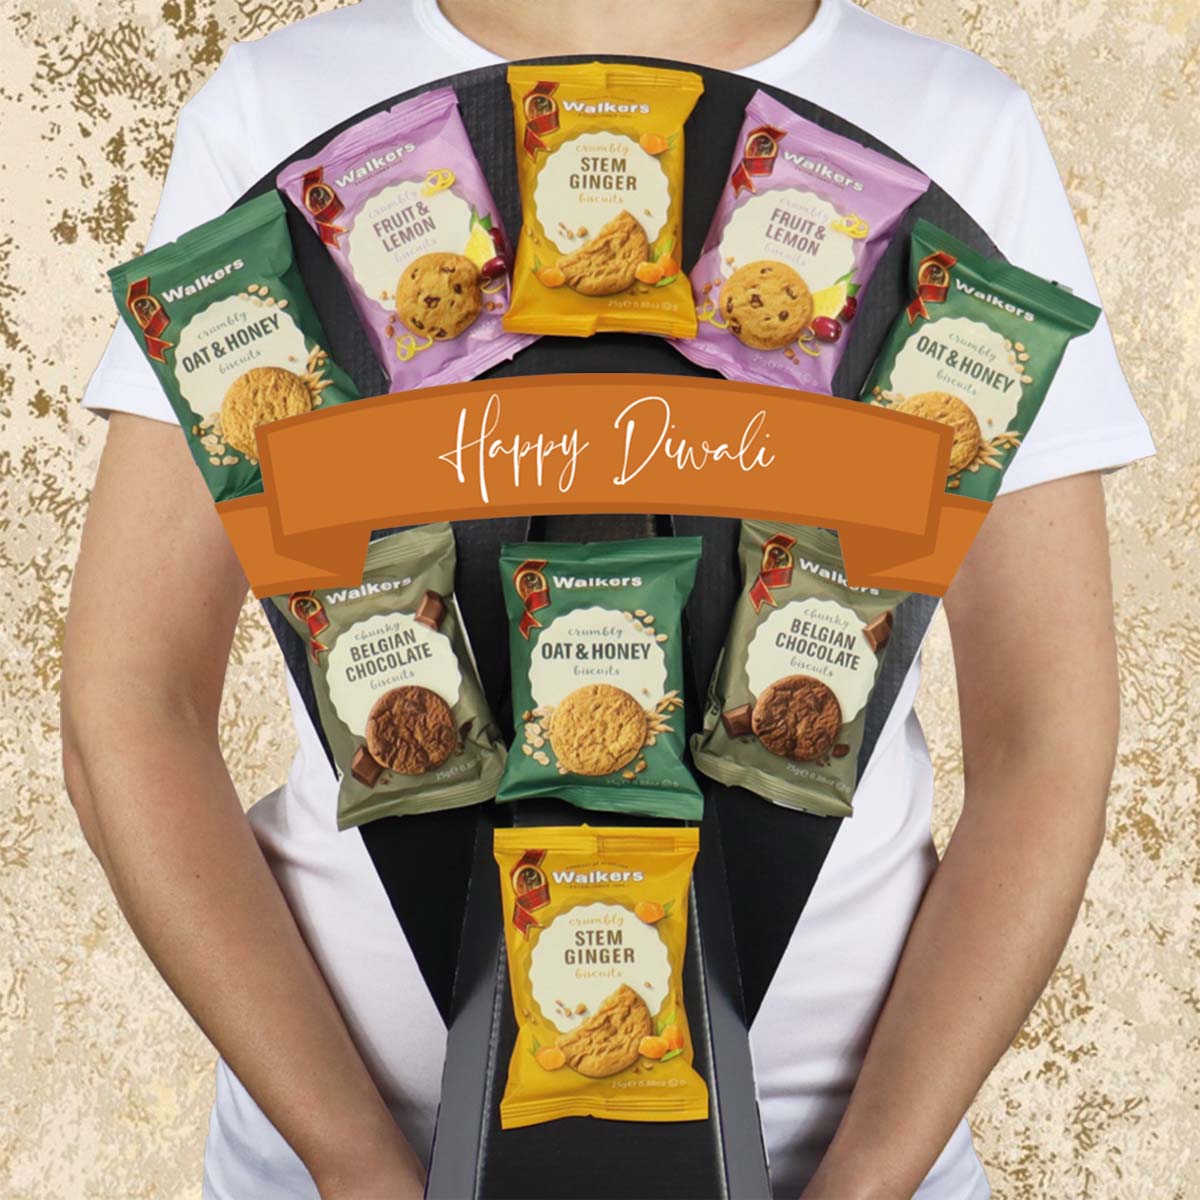 The Border Biscuit Happy Diwali Bouquet - With Shortbread, Cookies, Oat Crumbles & More - Gift Hamper Box by HamperWell